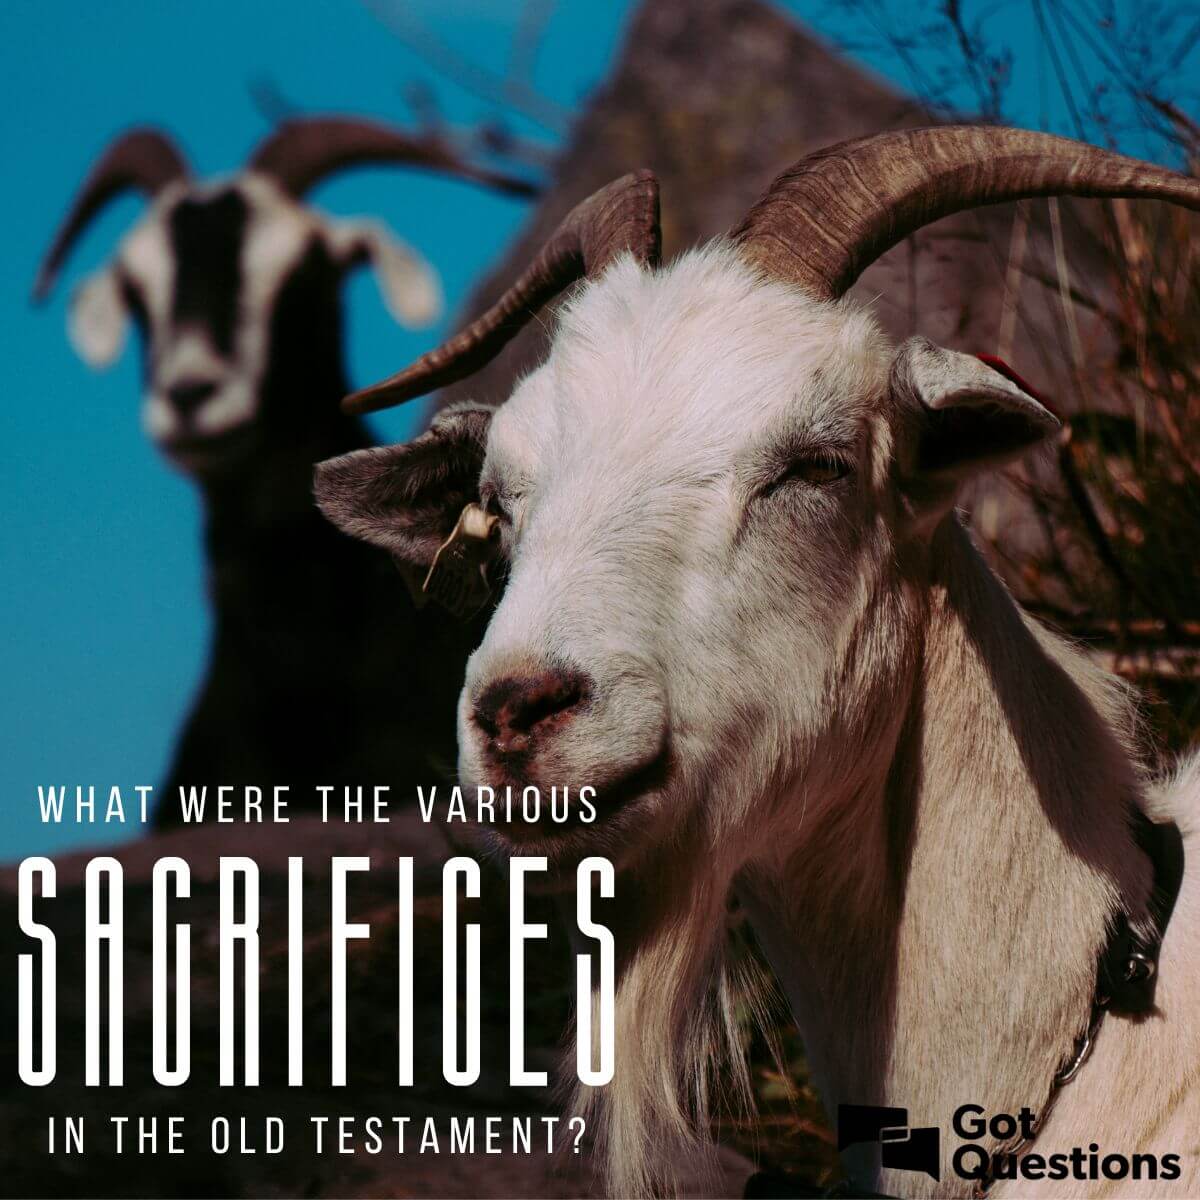 Sacrifices in the Old and New Testament